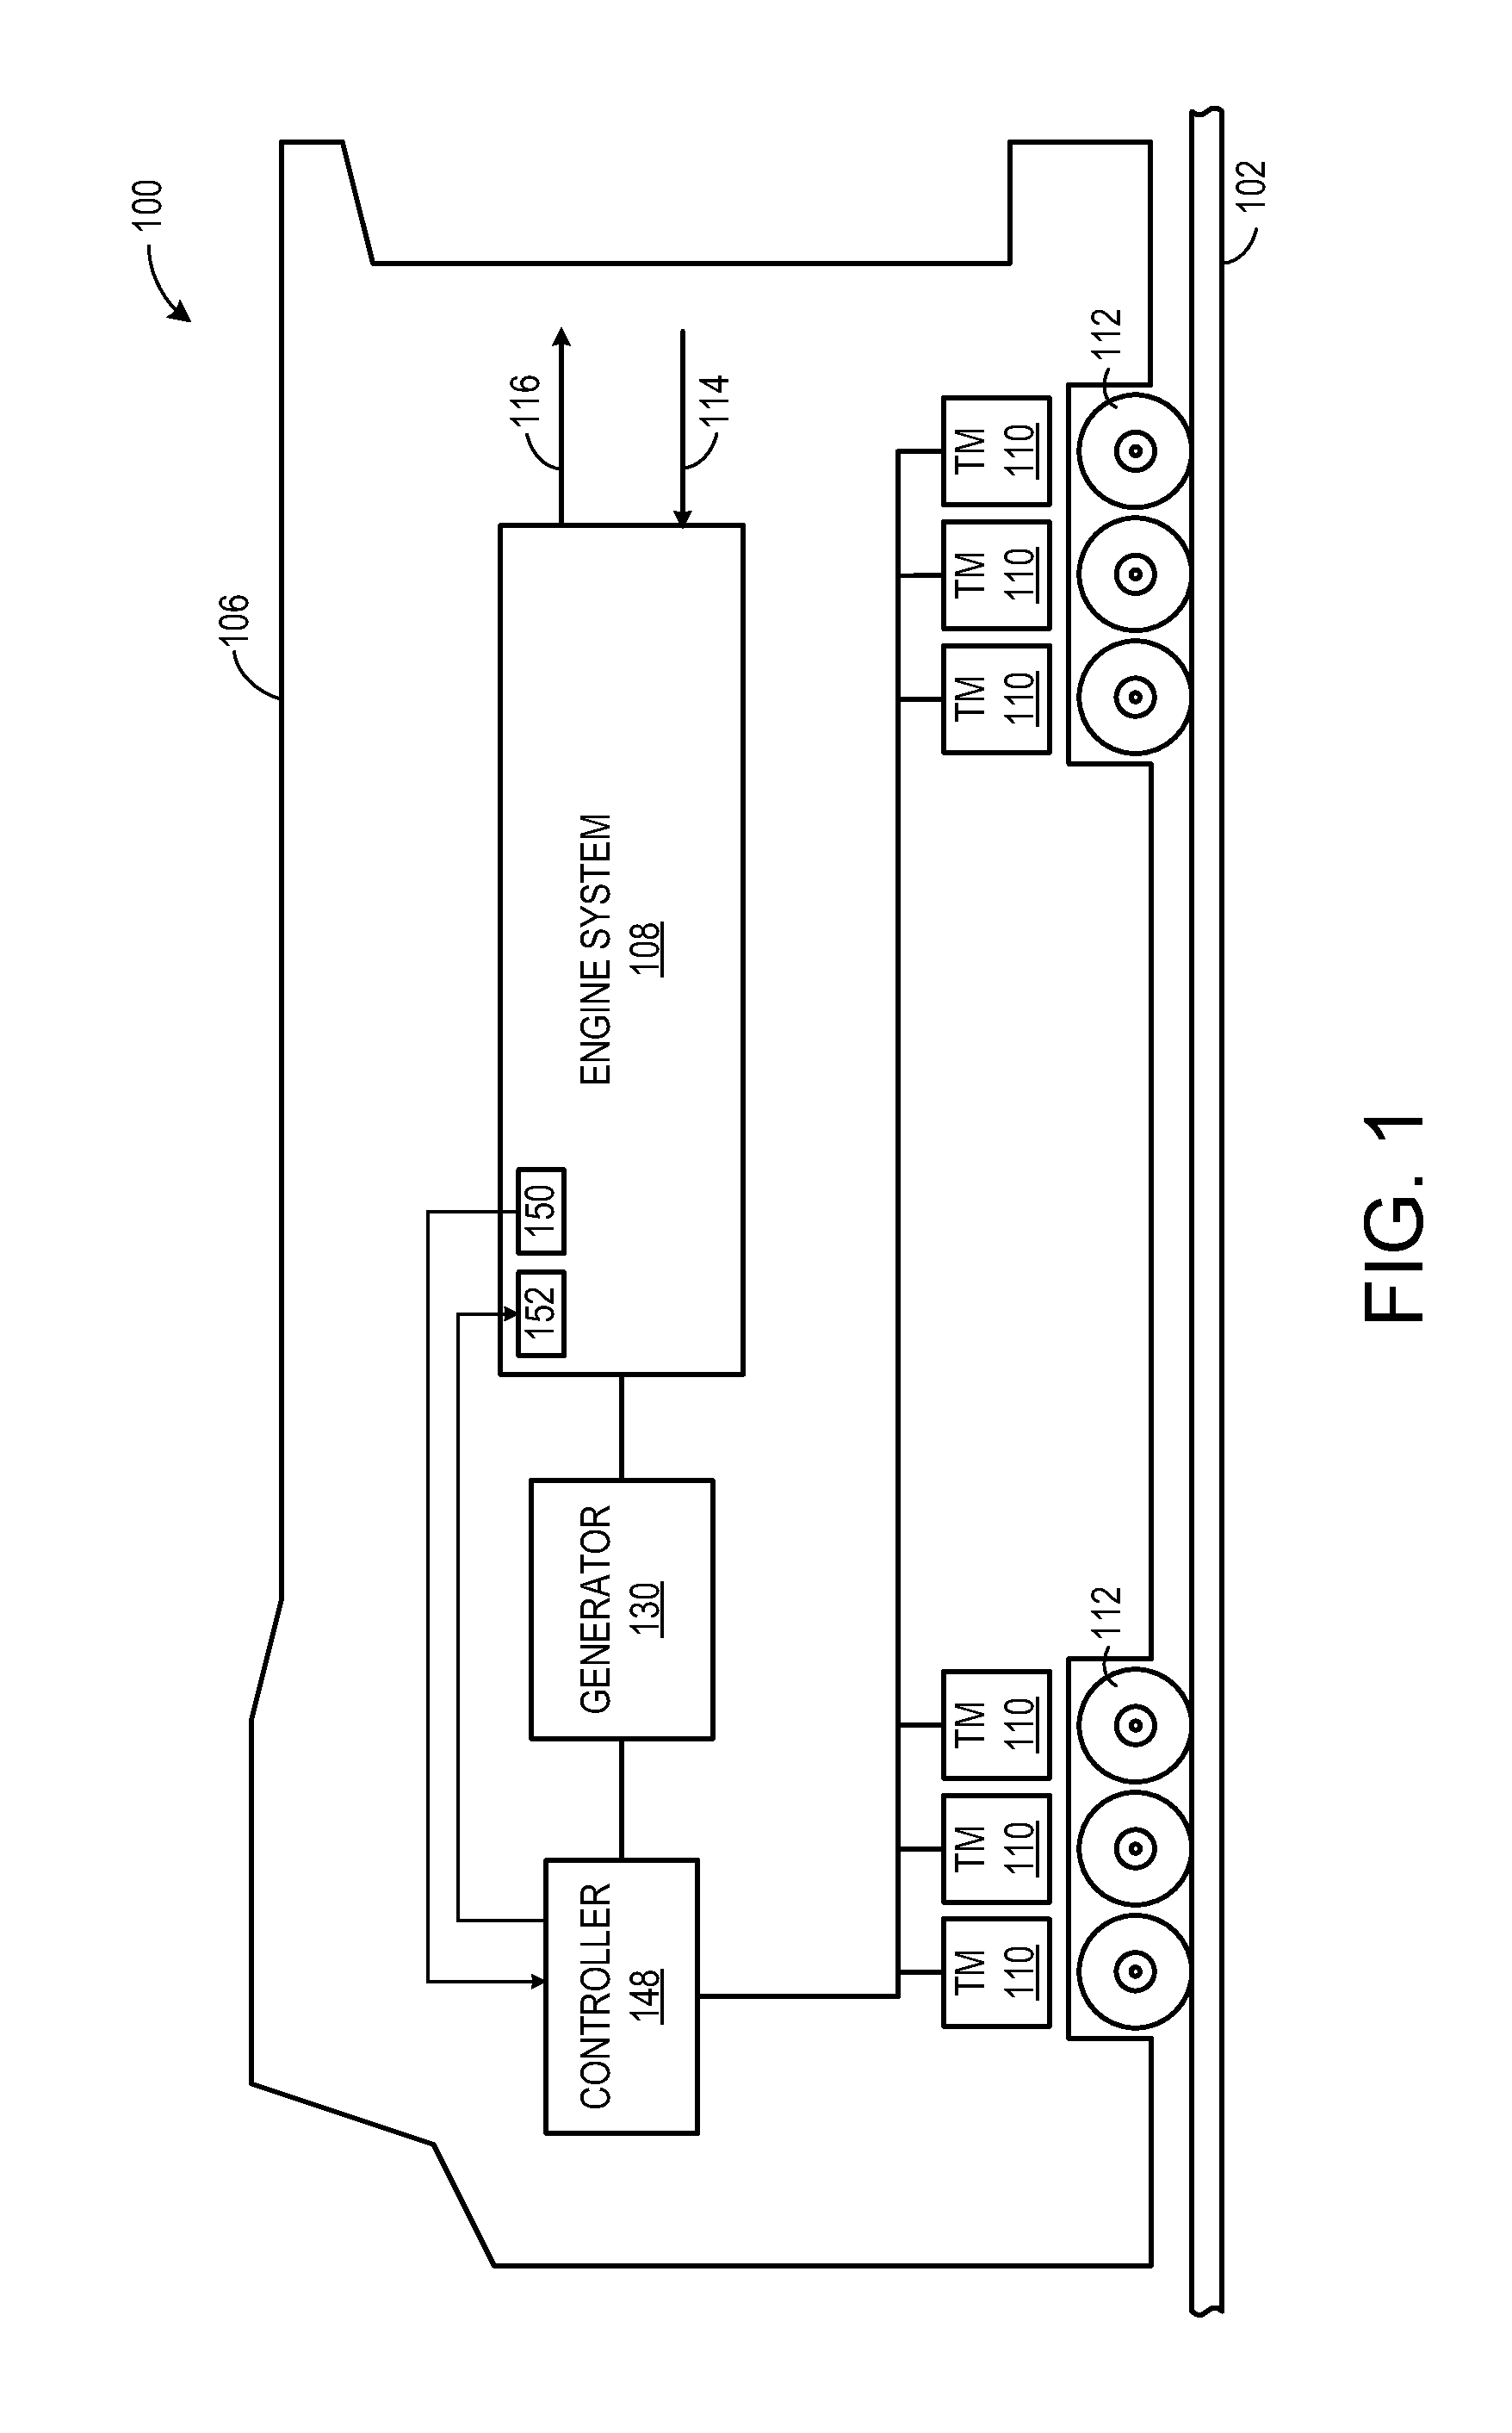 Methods and systems for controlling transient engine response